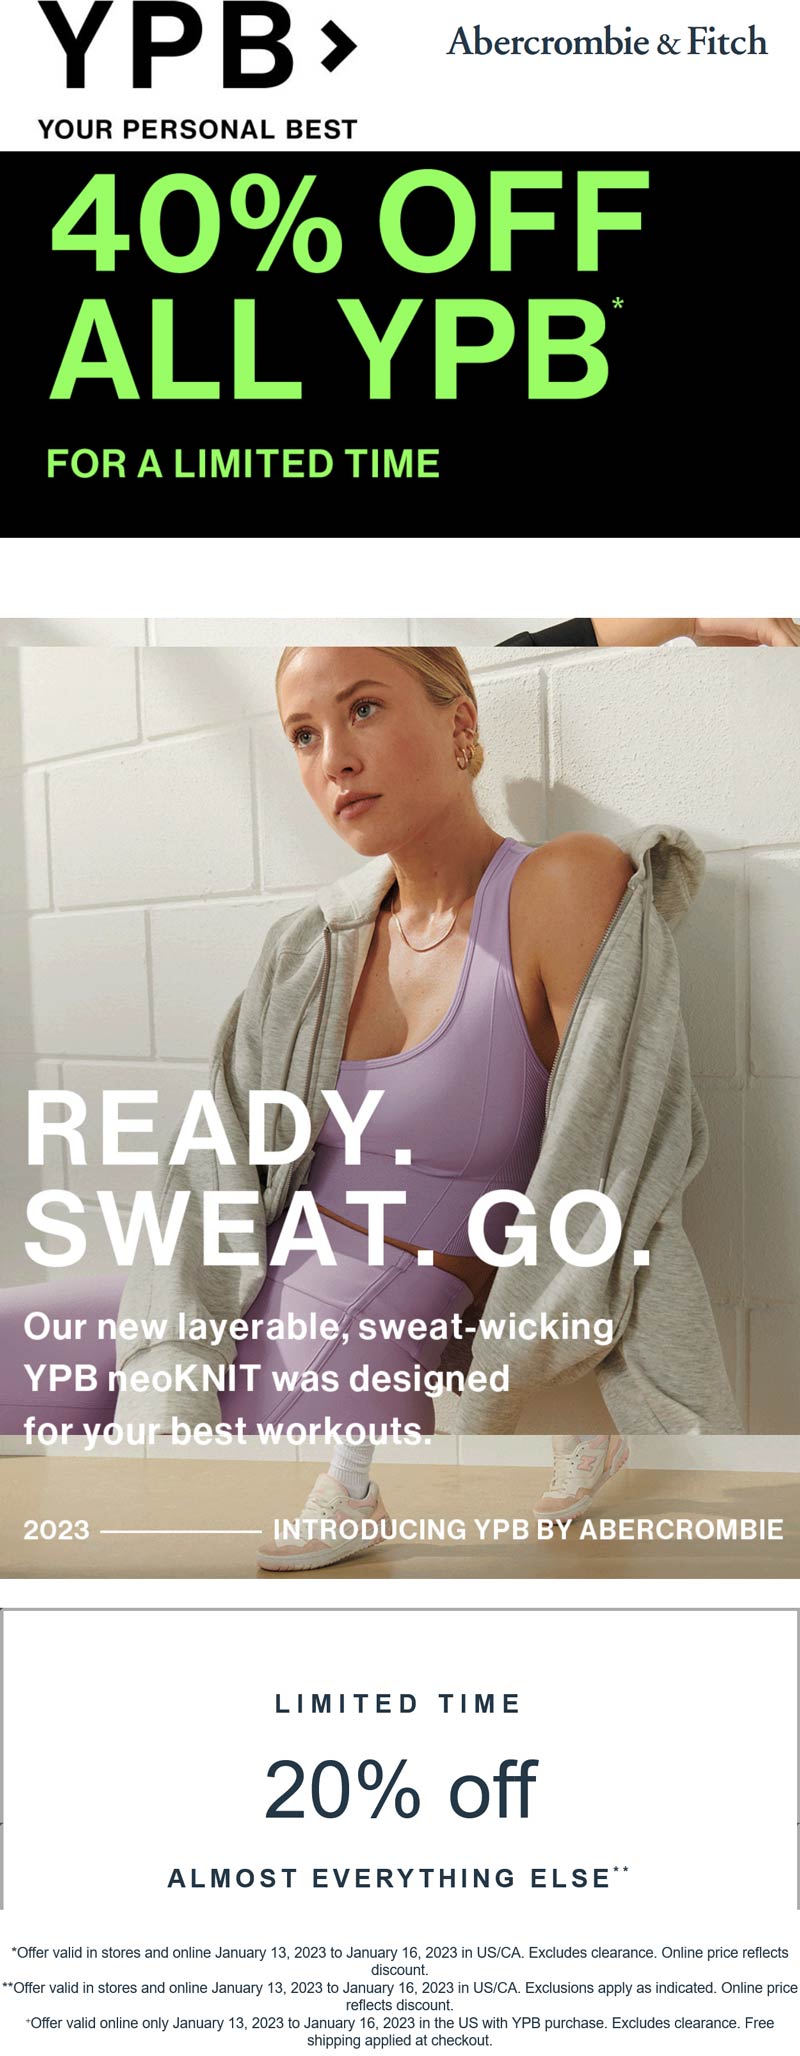 Abercrombie & Fitch stores Coupon  40% off YPB workout gear at Abercrombie & Fitch #abercrombiefitch 